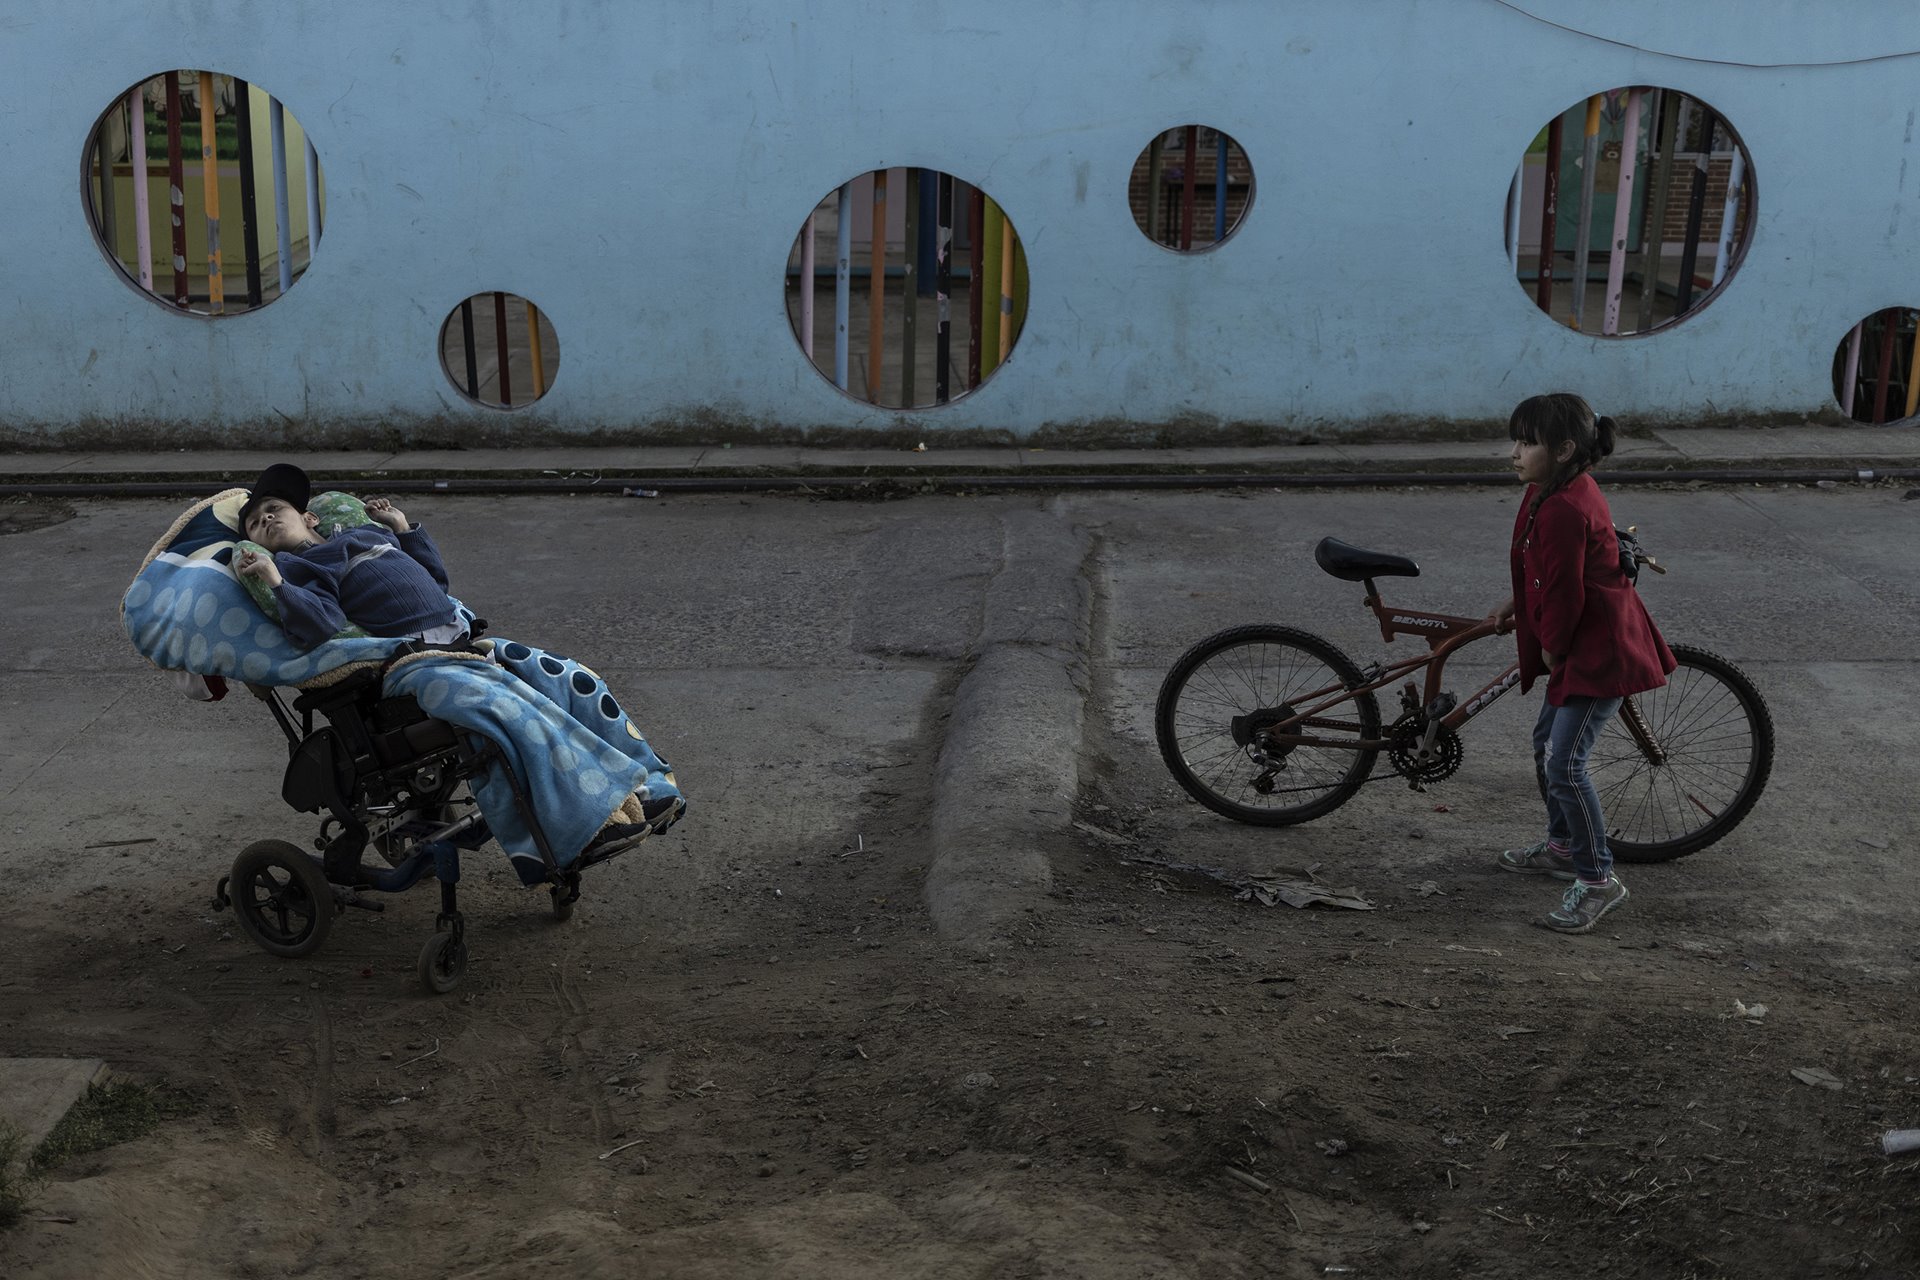 Sebastián (18), who lives with hydrocephalus (a neurological disorder caused by a build-up of fluids in cavities within the brain), waits while his father bunches up flowers to sell in the market, in Villa Guerrero, Mexico. His niece, Valentina, looks on.